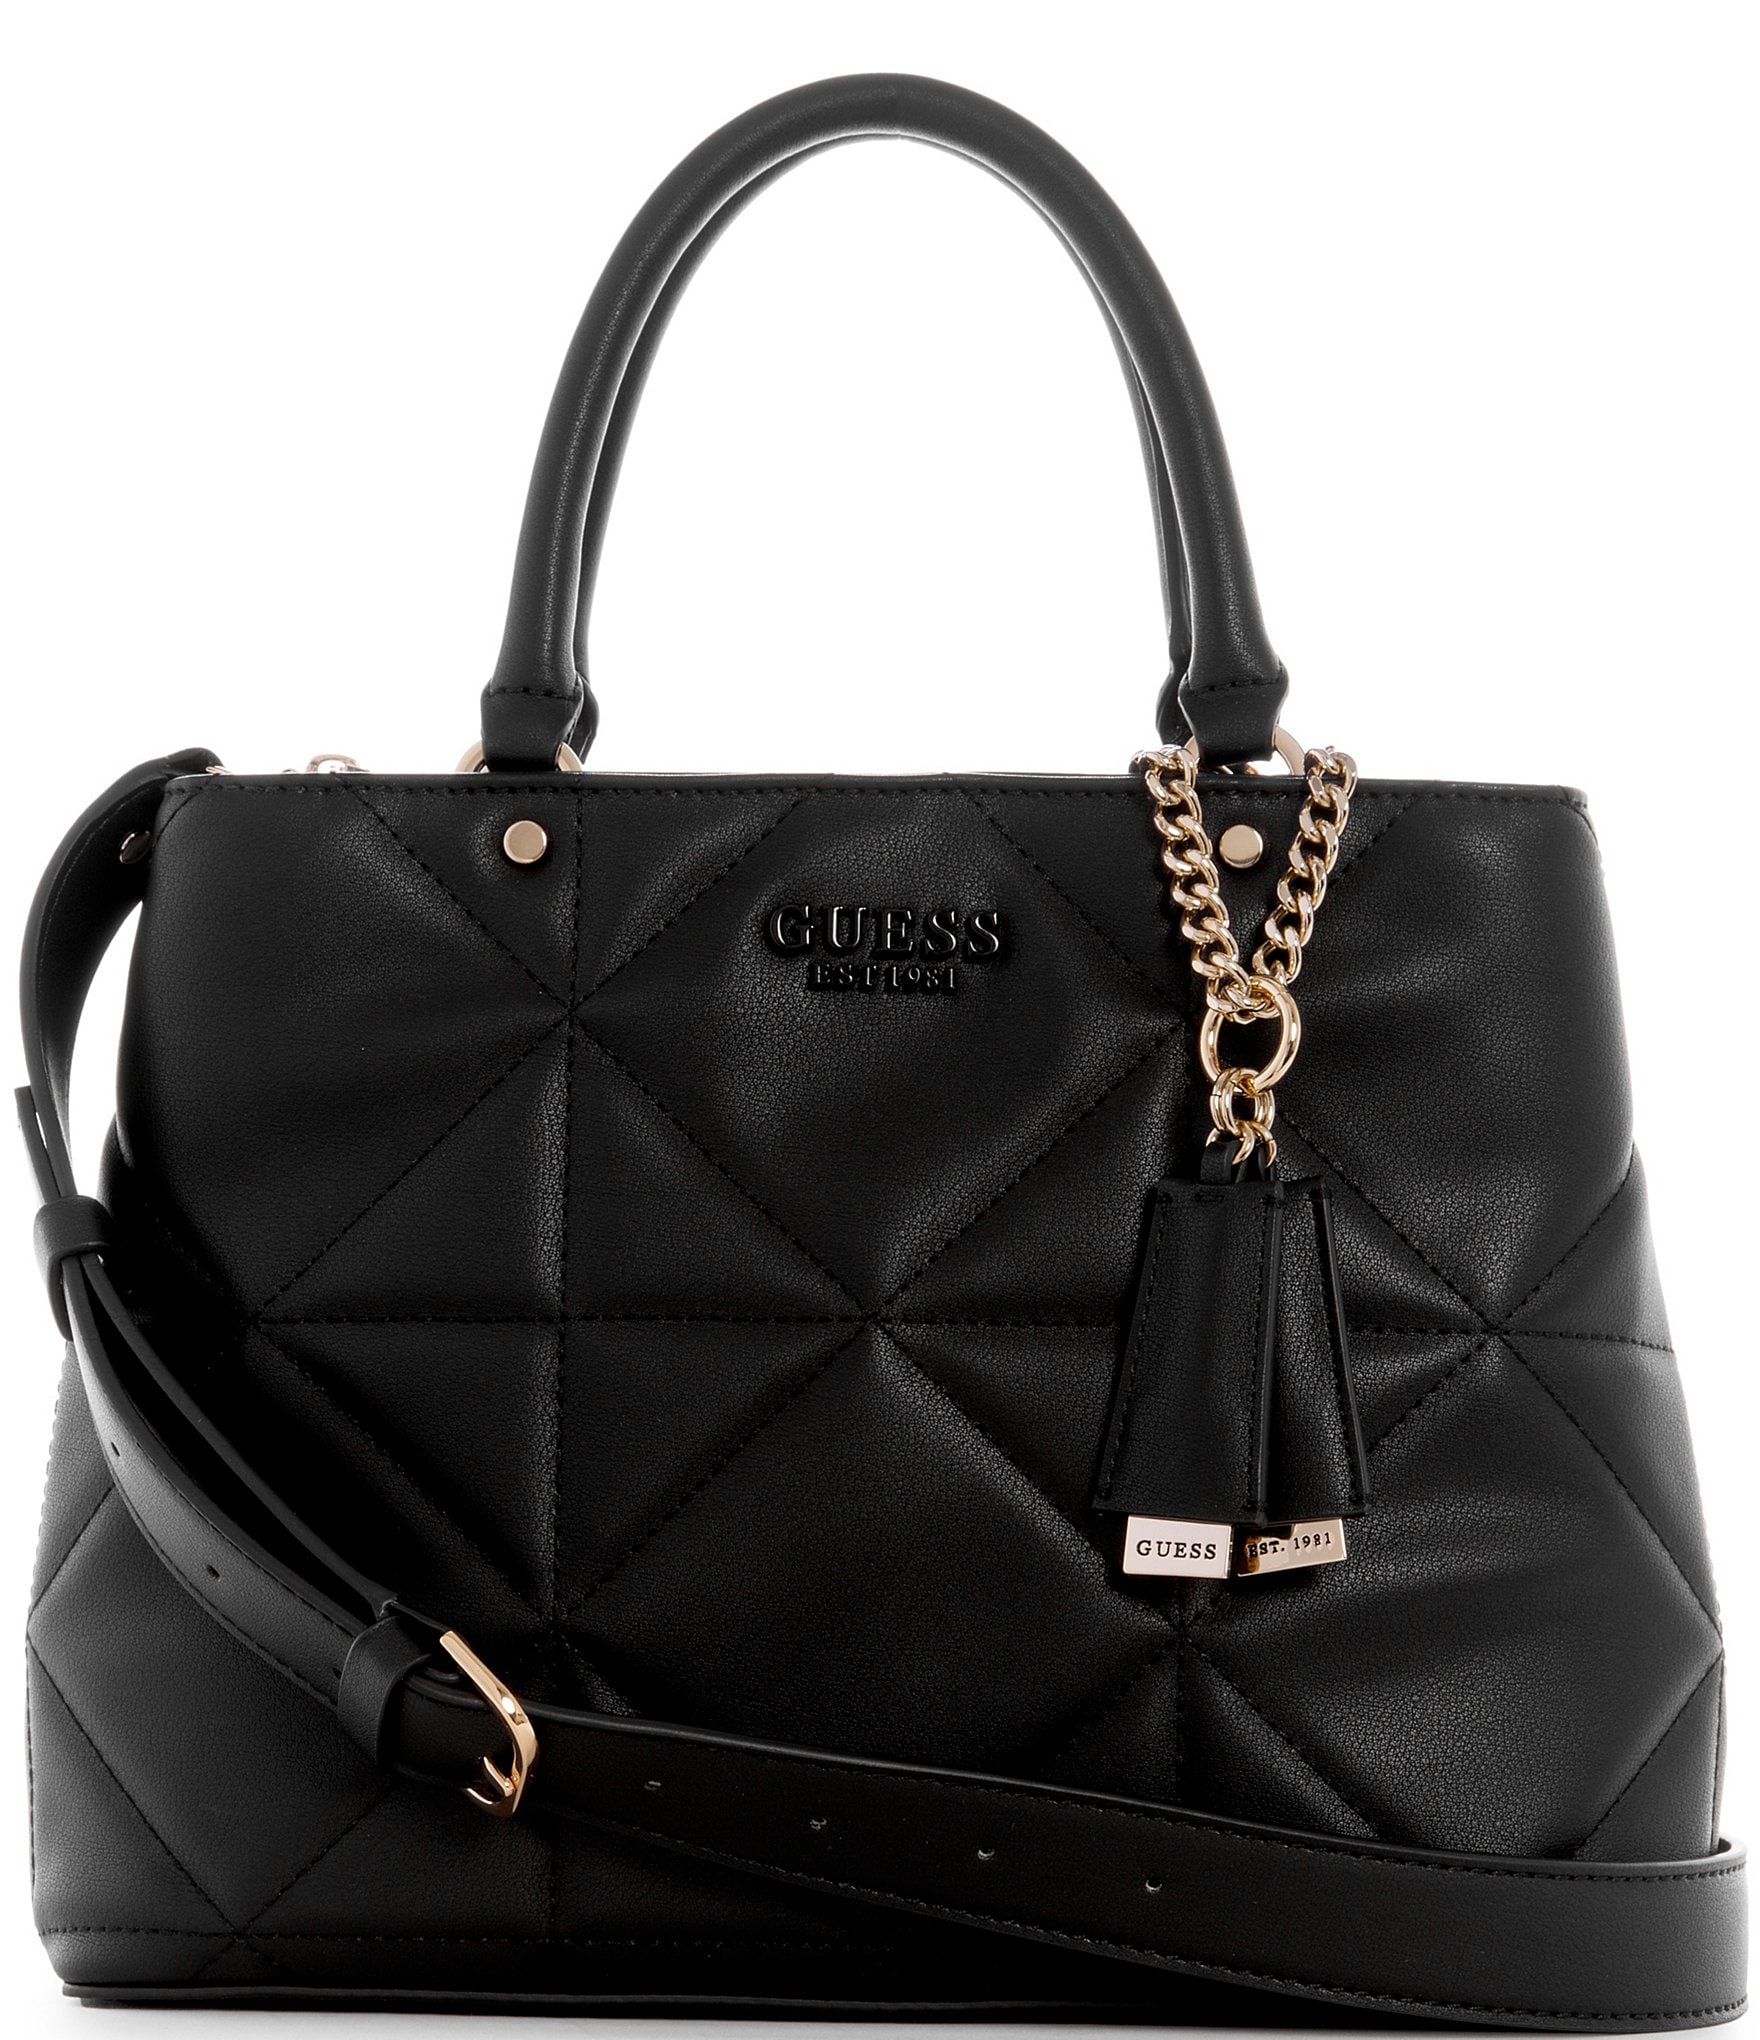 GUESS Leather Handbags